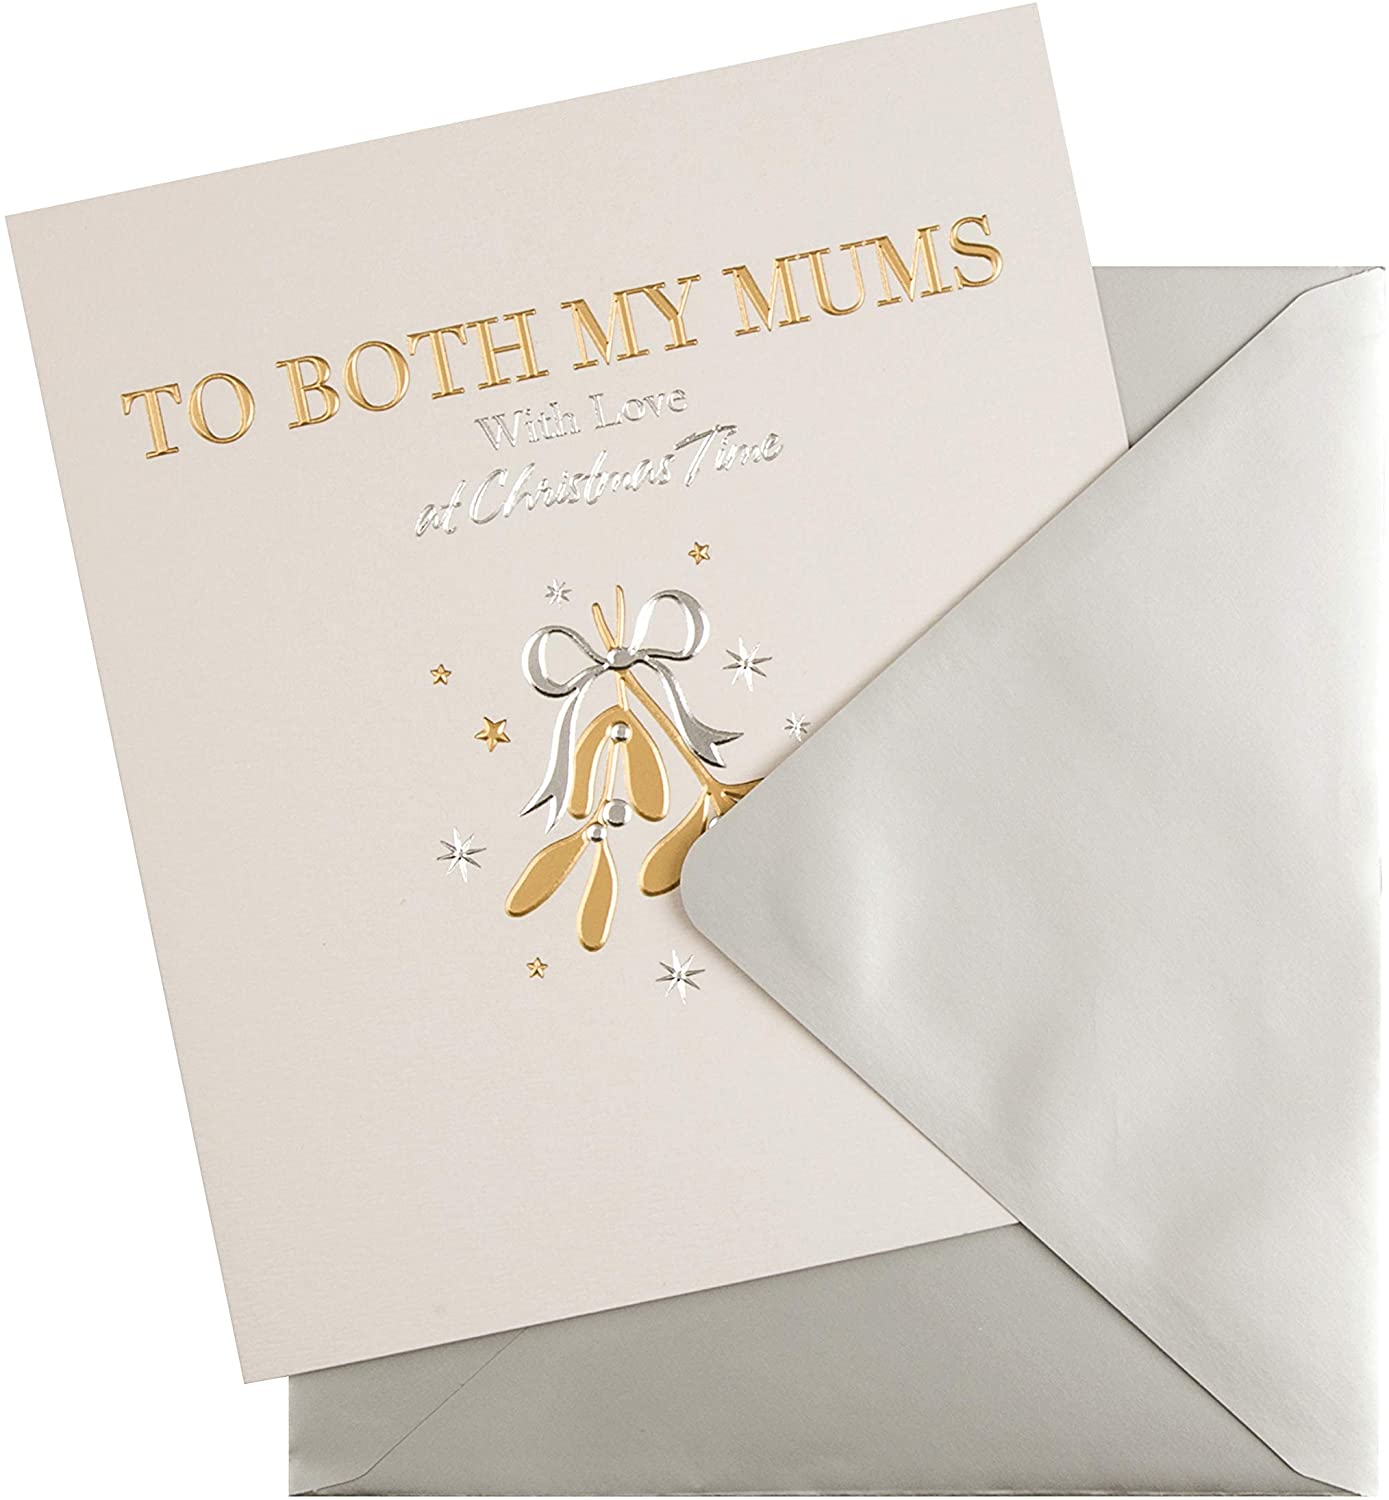 Christmas Studio Card for 'Both My Mums' with Simple Gold Foiled Design 